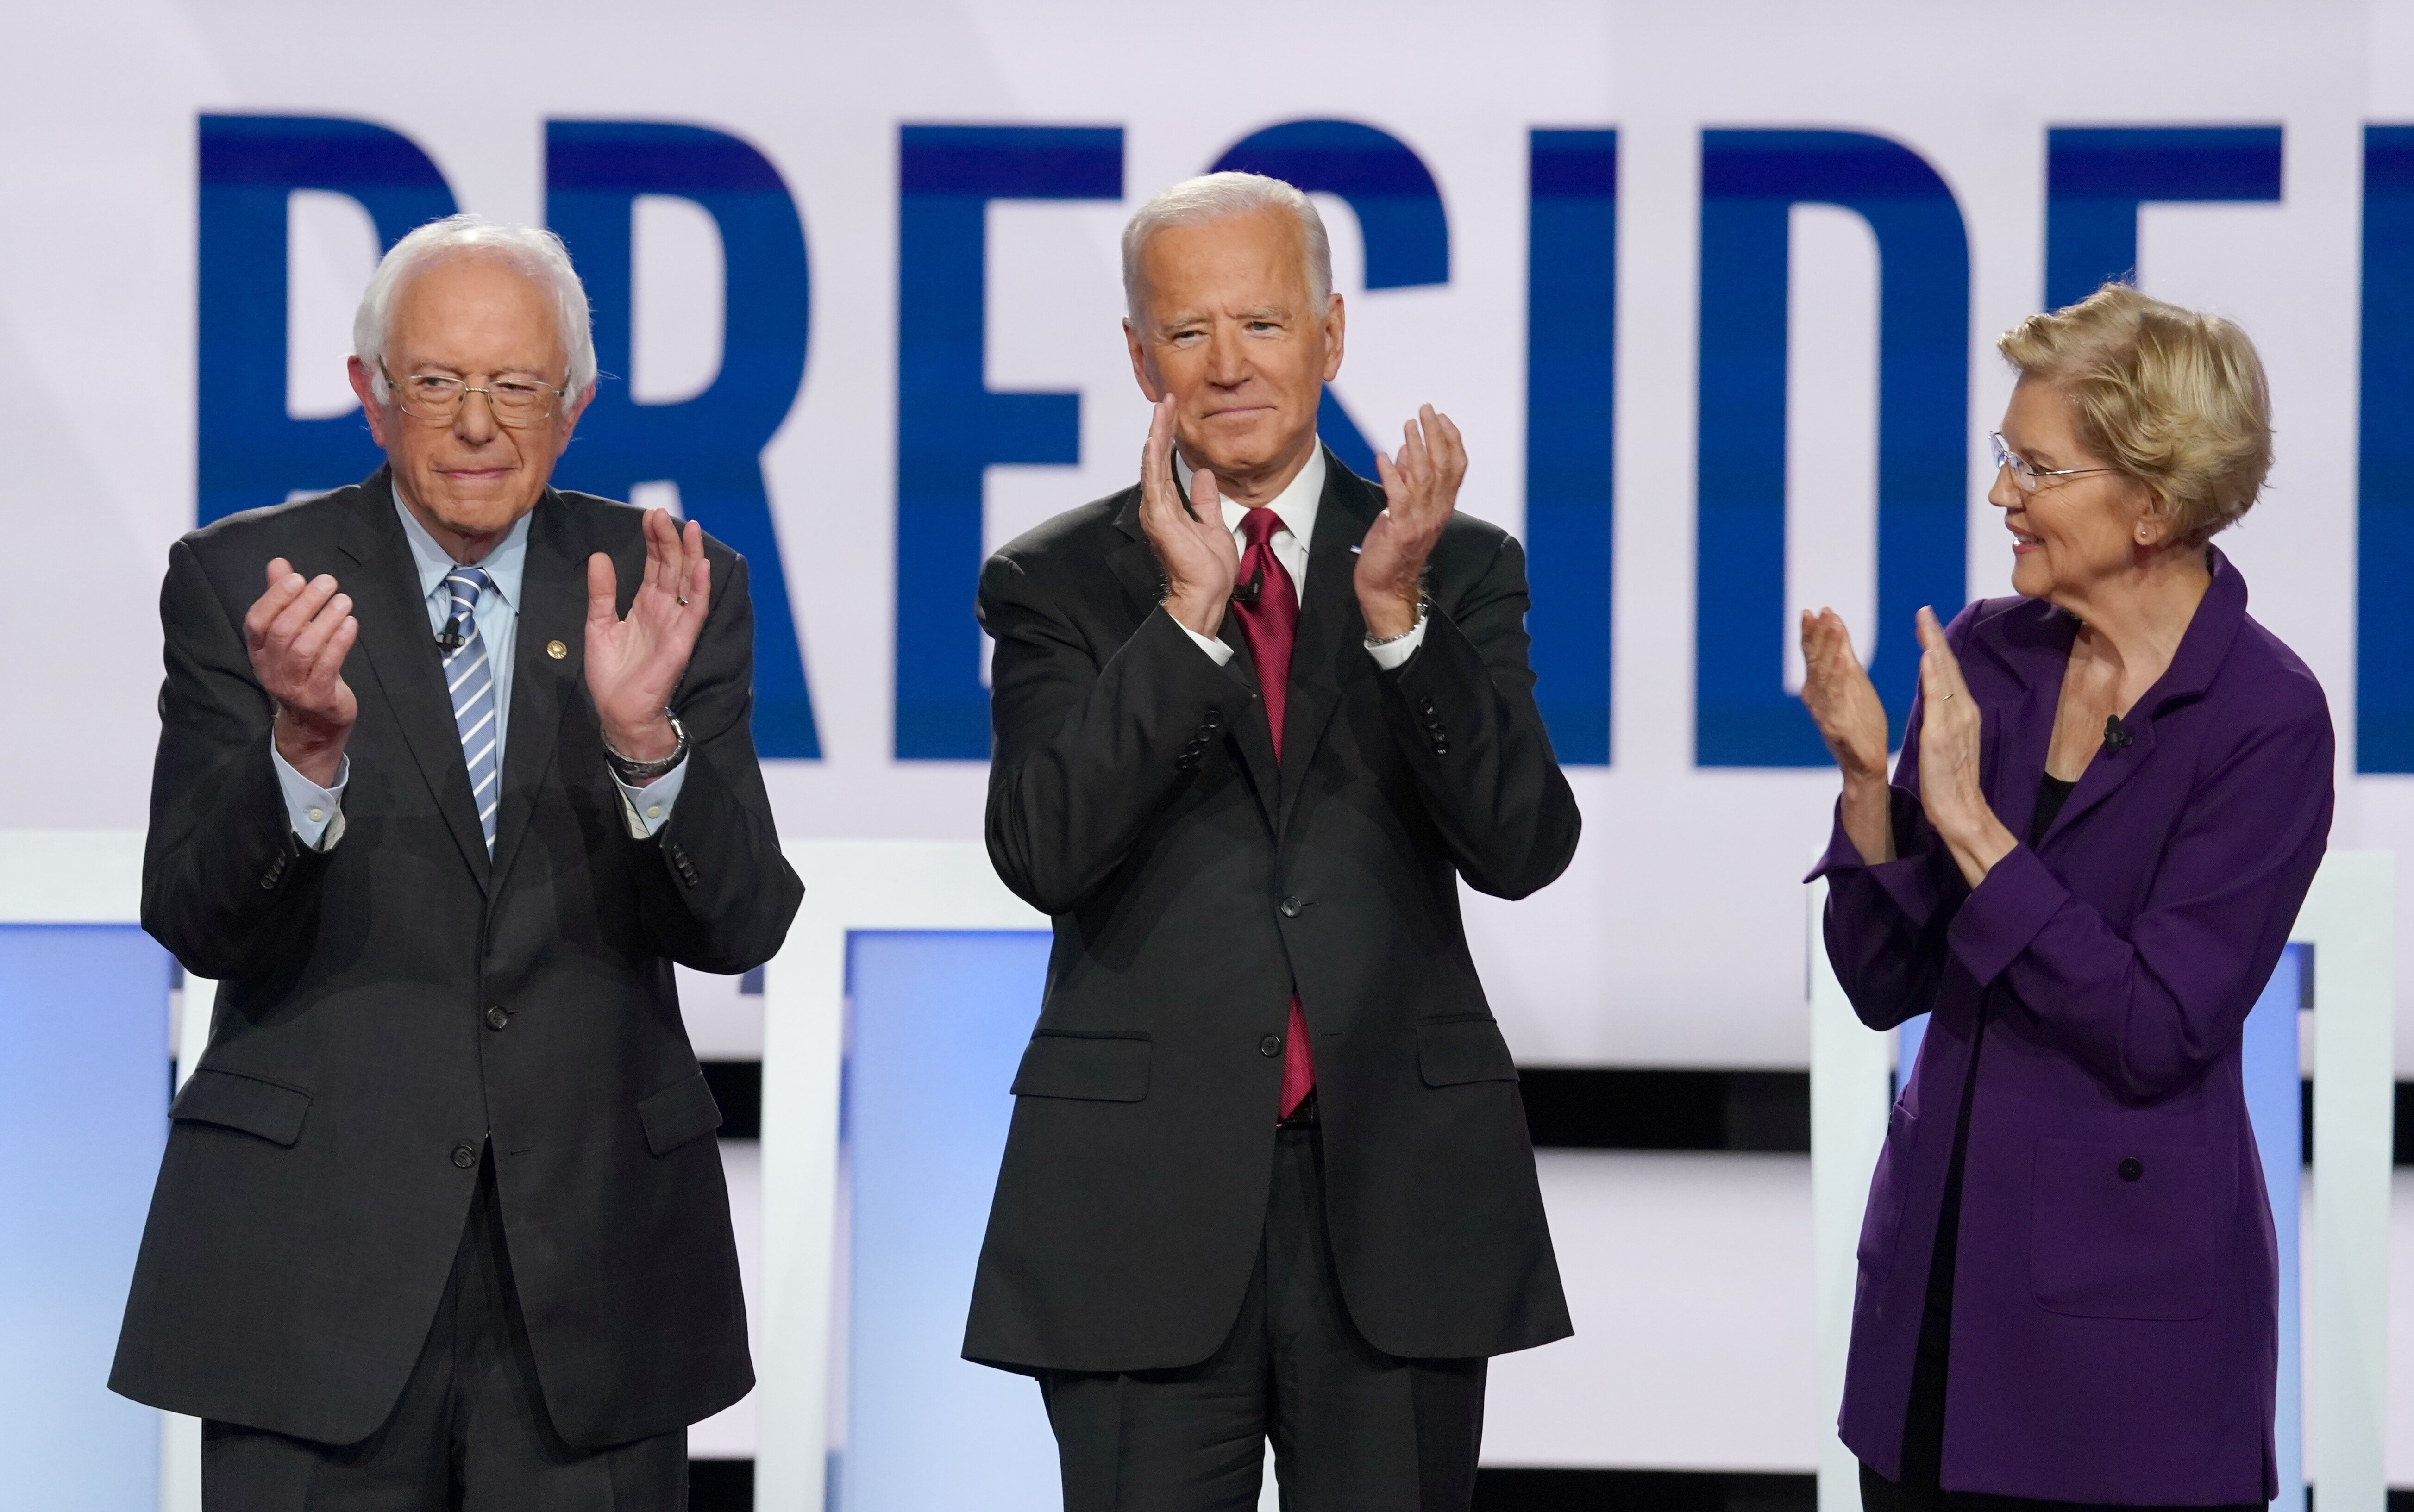 4 Debates In, Democrats Finally Got The Chance To Talk Abortion Rights